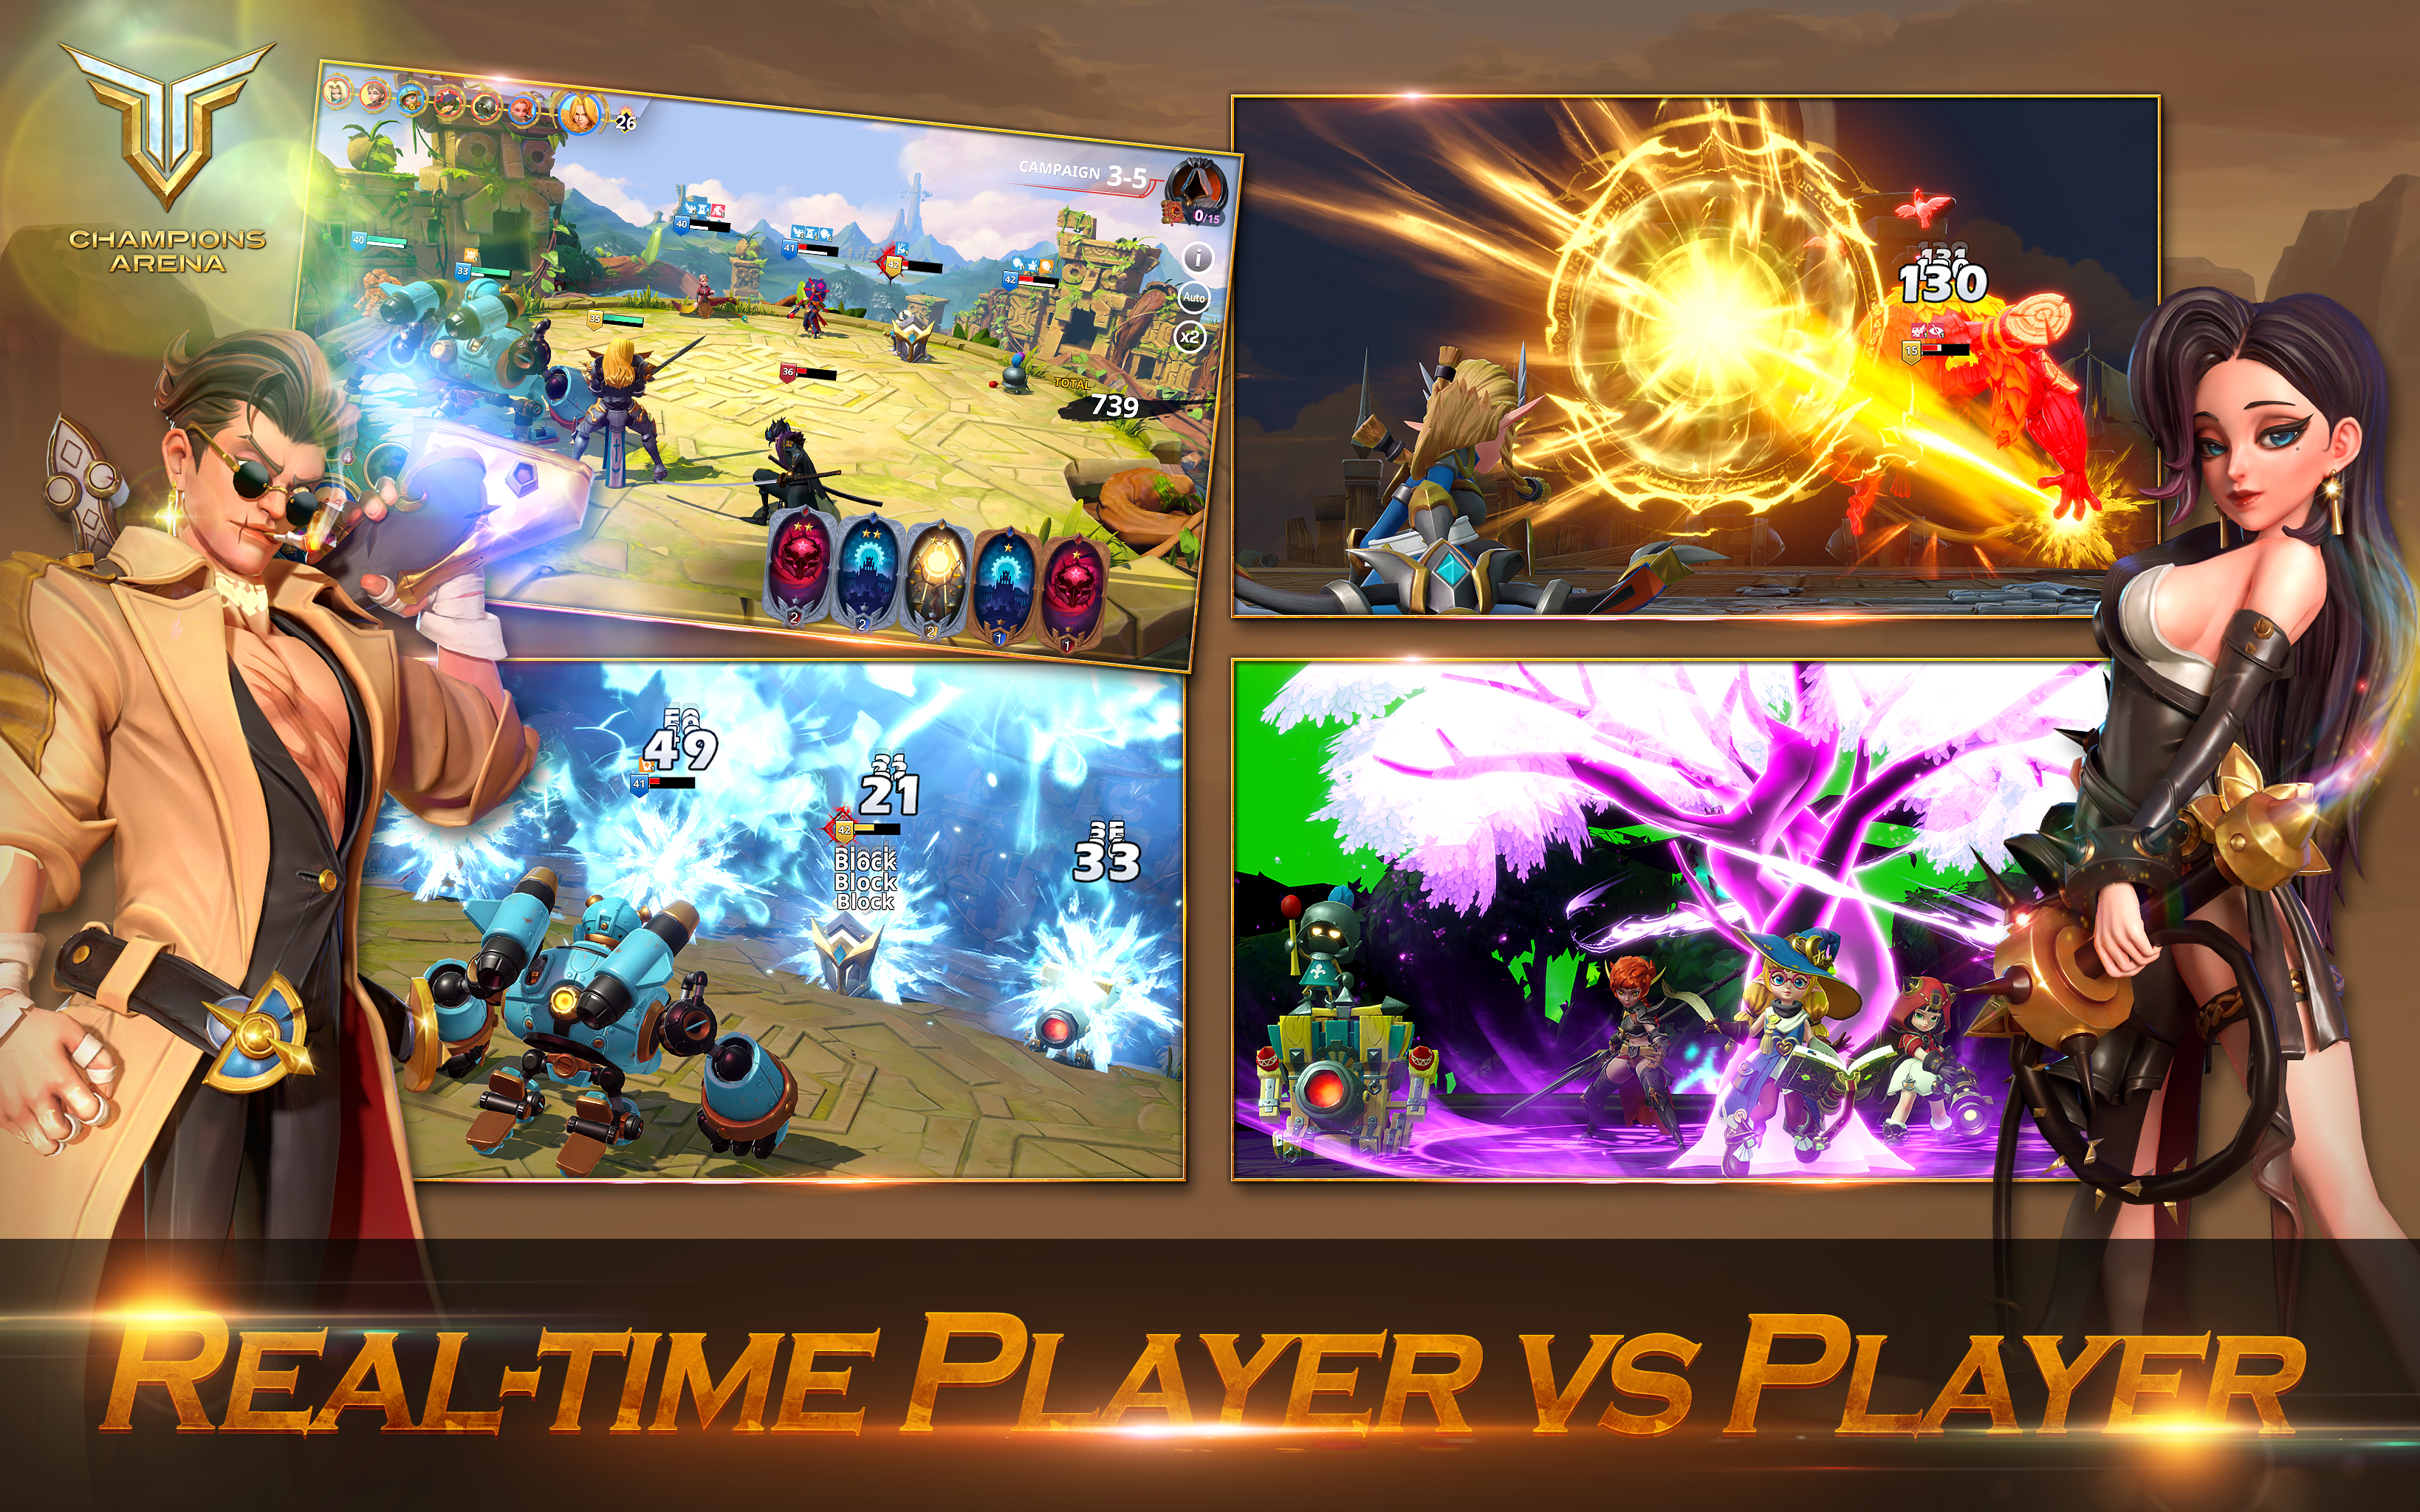 Champions Arena APK for Android Download